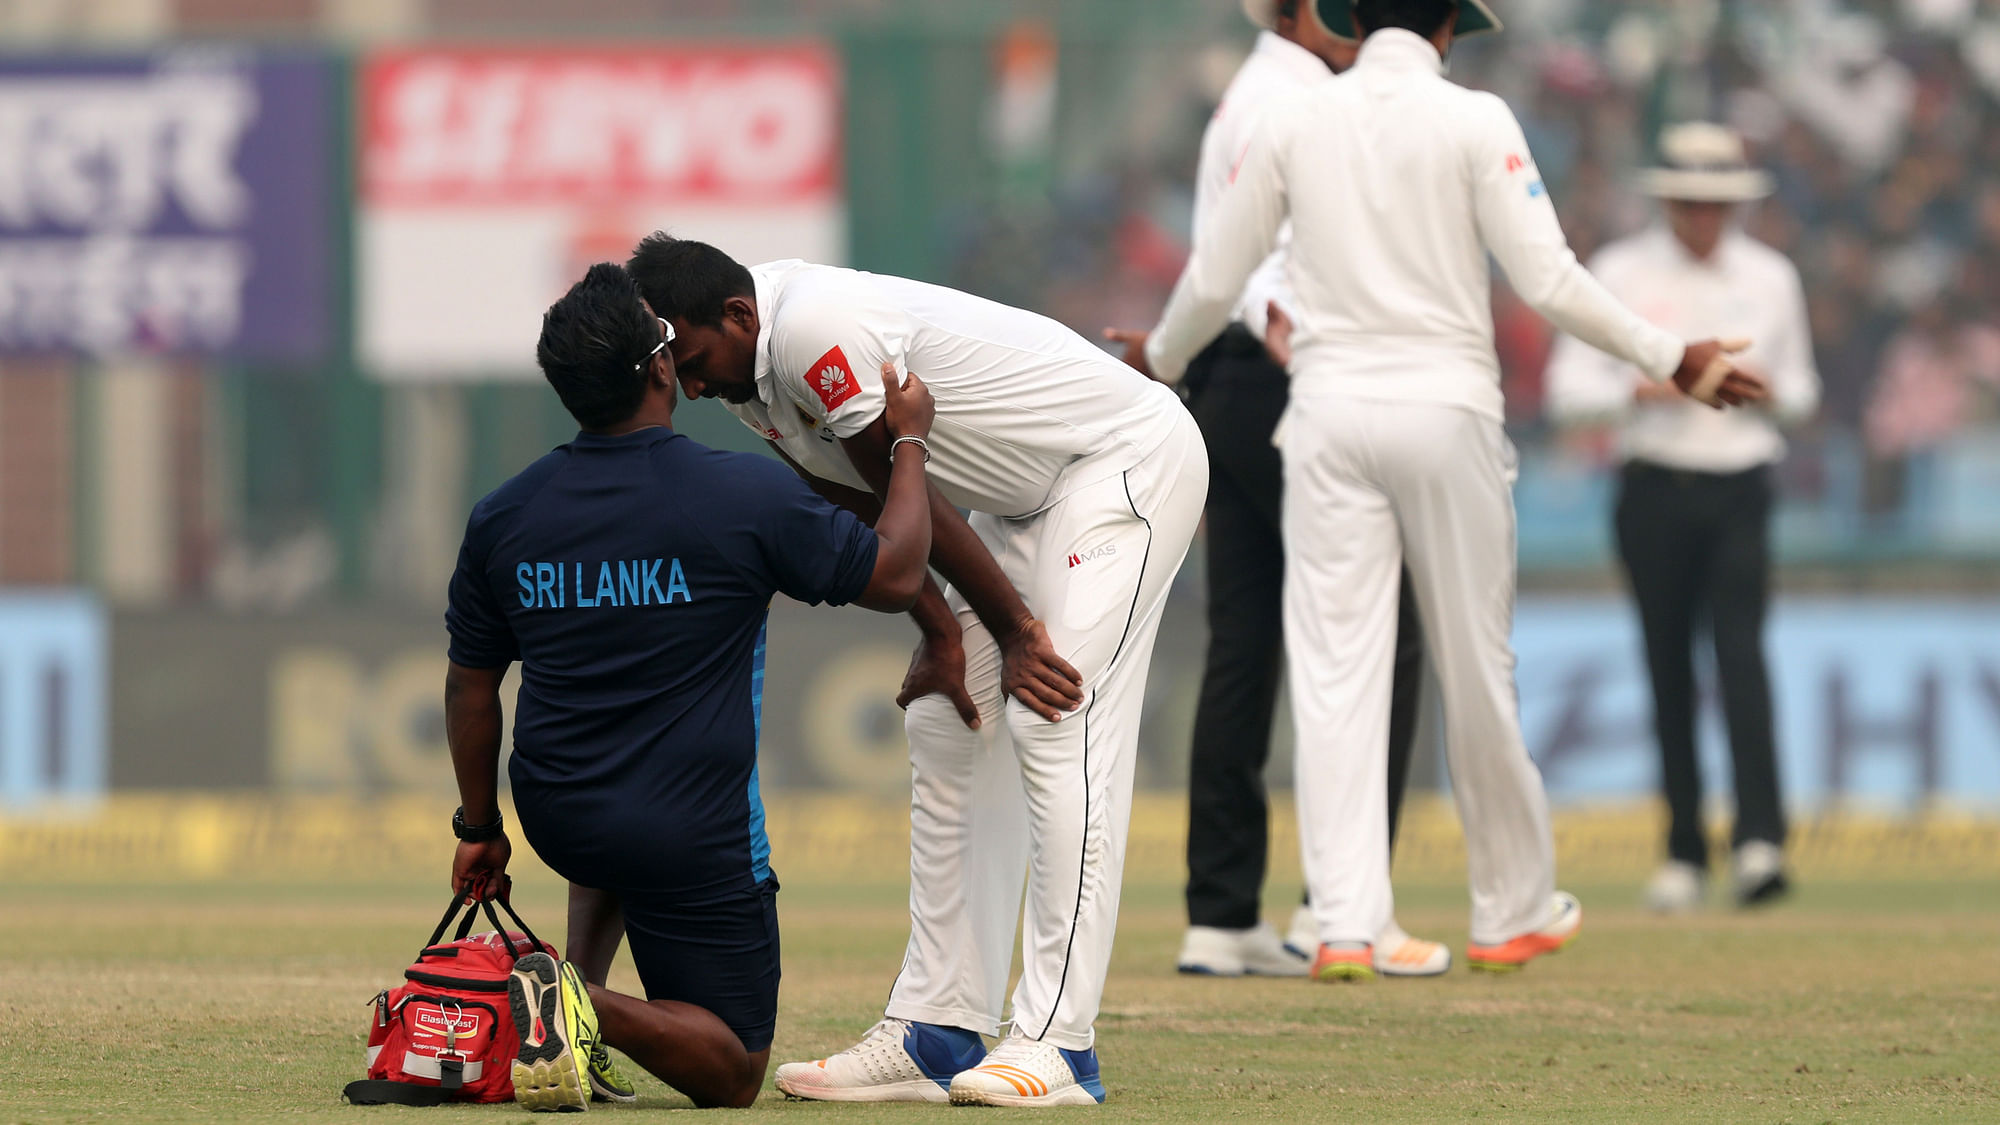 About four overs after Lunch was taken, Sri Lankan bowler Lahiru Gamage appeared to be under the weather.